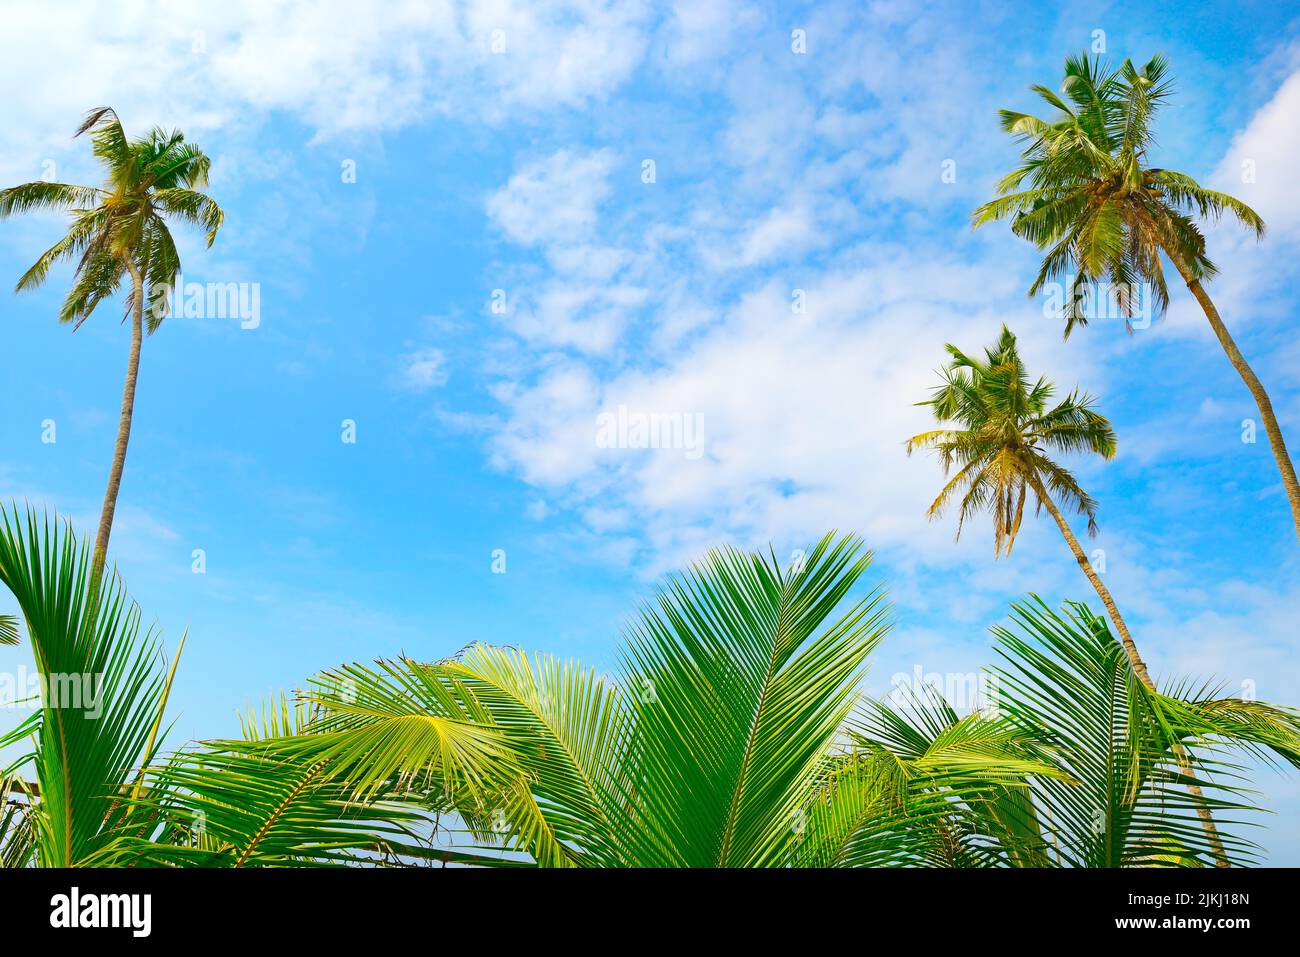 Coconut palm tree and blue sky. Tropical background Stock Photo